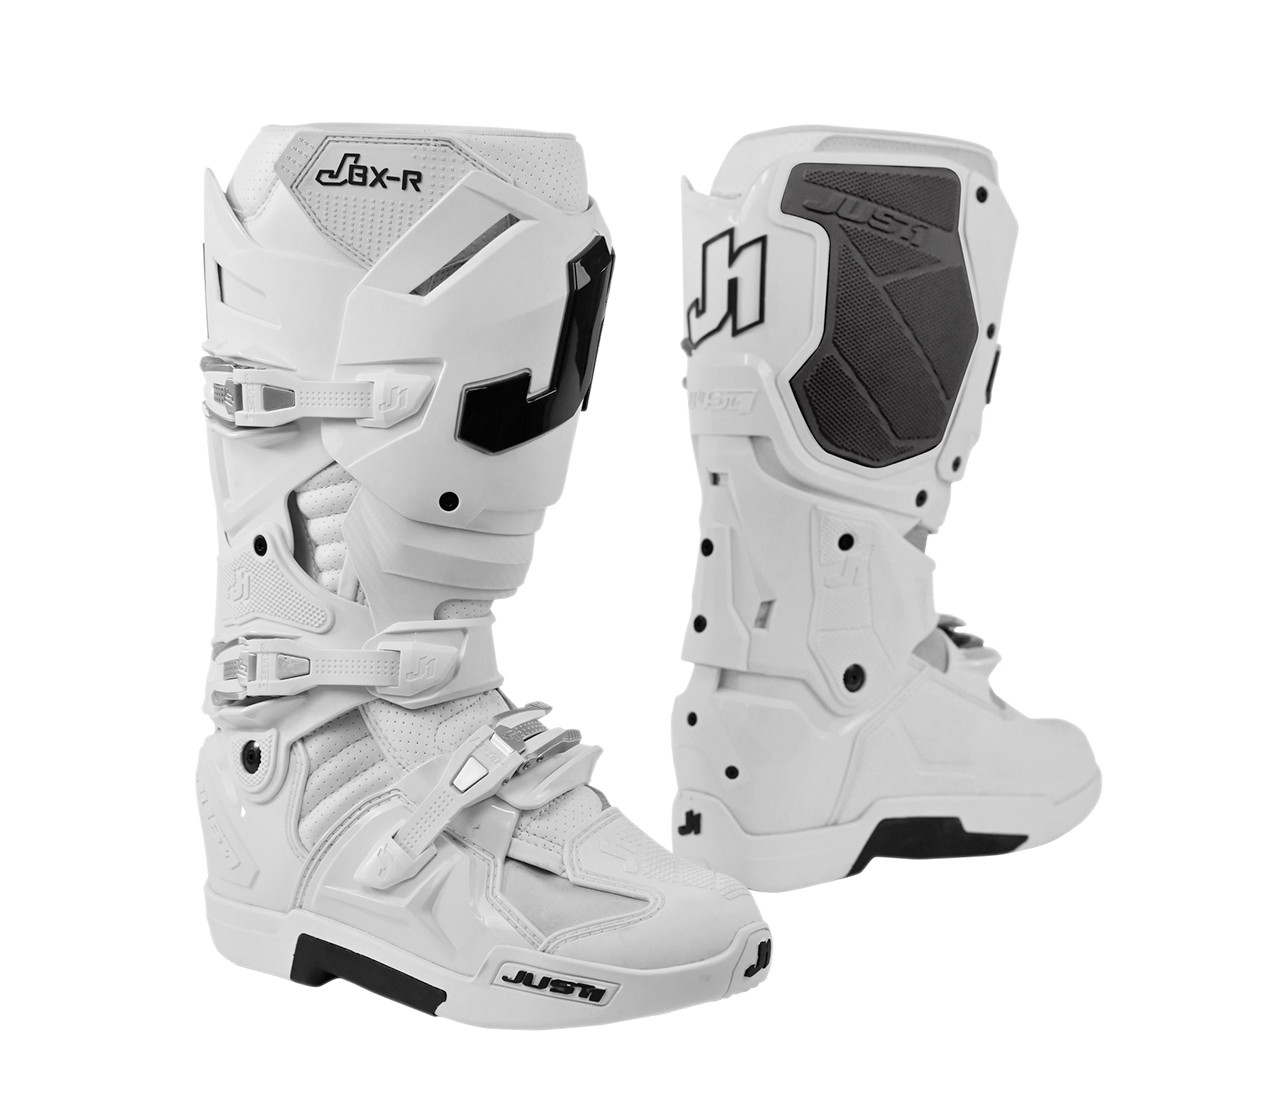 JUST1 BOOTS JBX-R MX sole SOLID WHITE